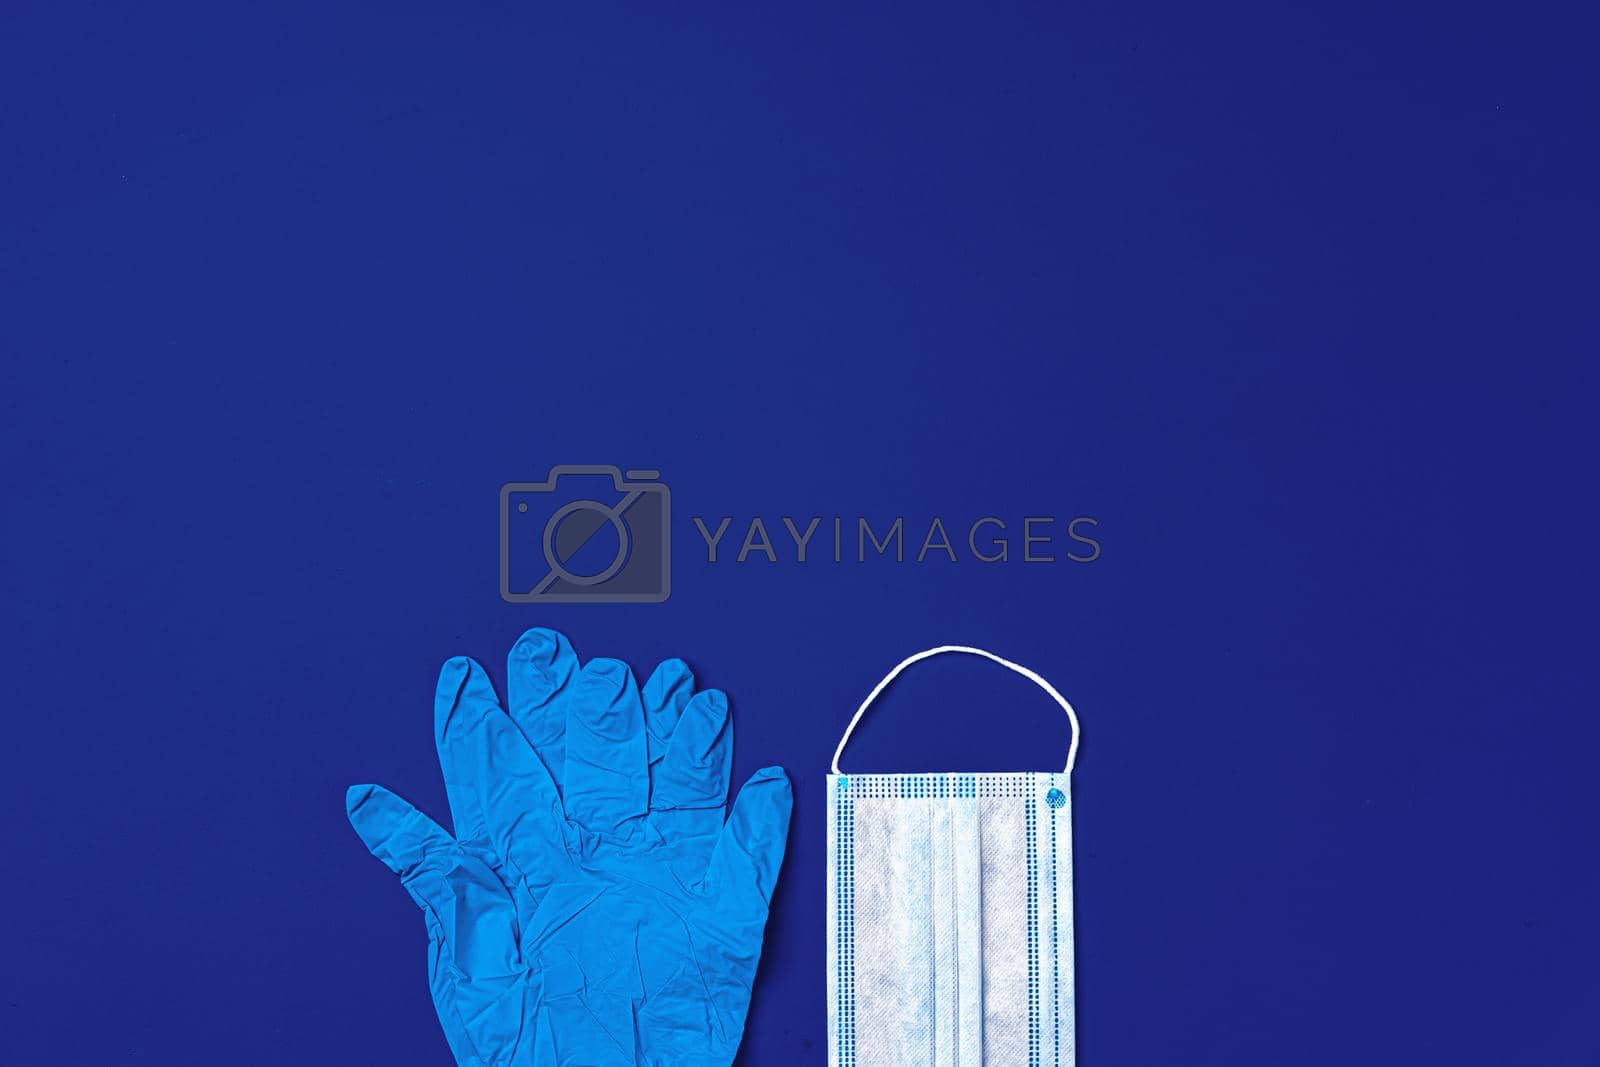 Royalty free image of Medical gloves and surgical protective face mask on dark blue background by Fabrikasimf